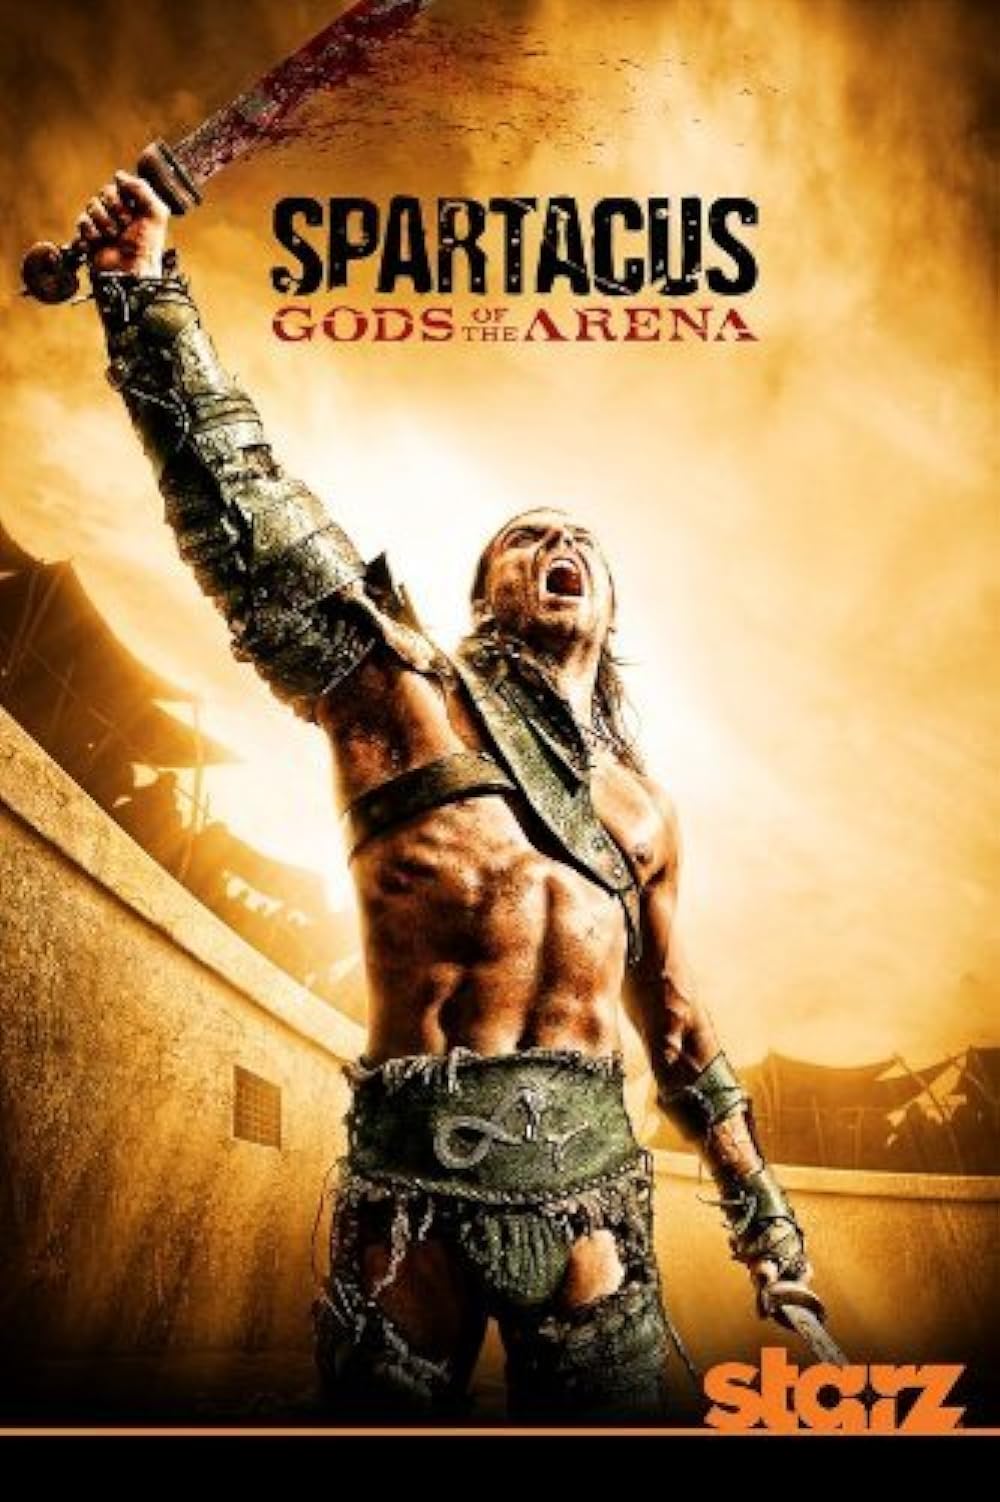 bally dosanjh recommends spartacus season 1 download pic